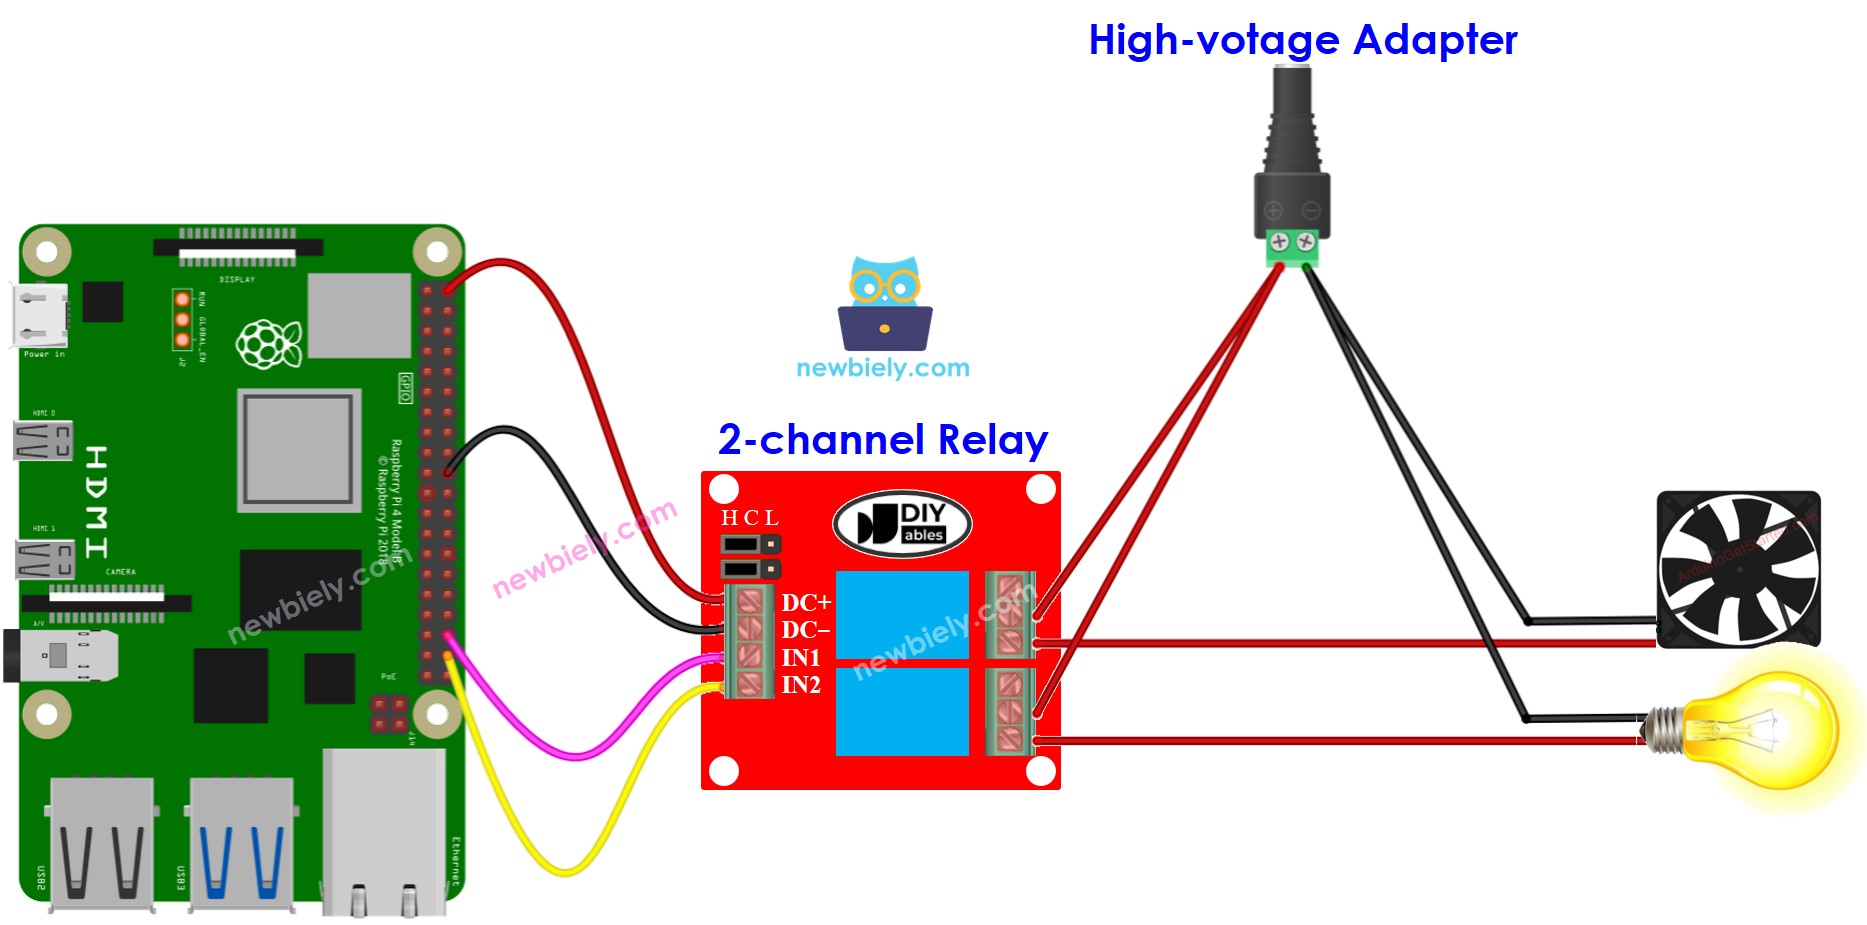 The wiring diagram between Raspberry Pi and 2-channel relay module